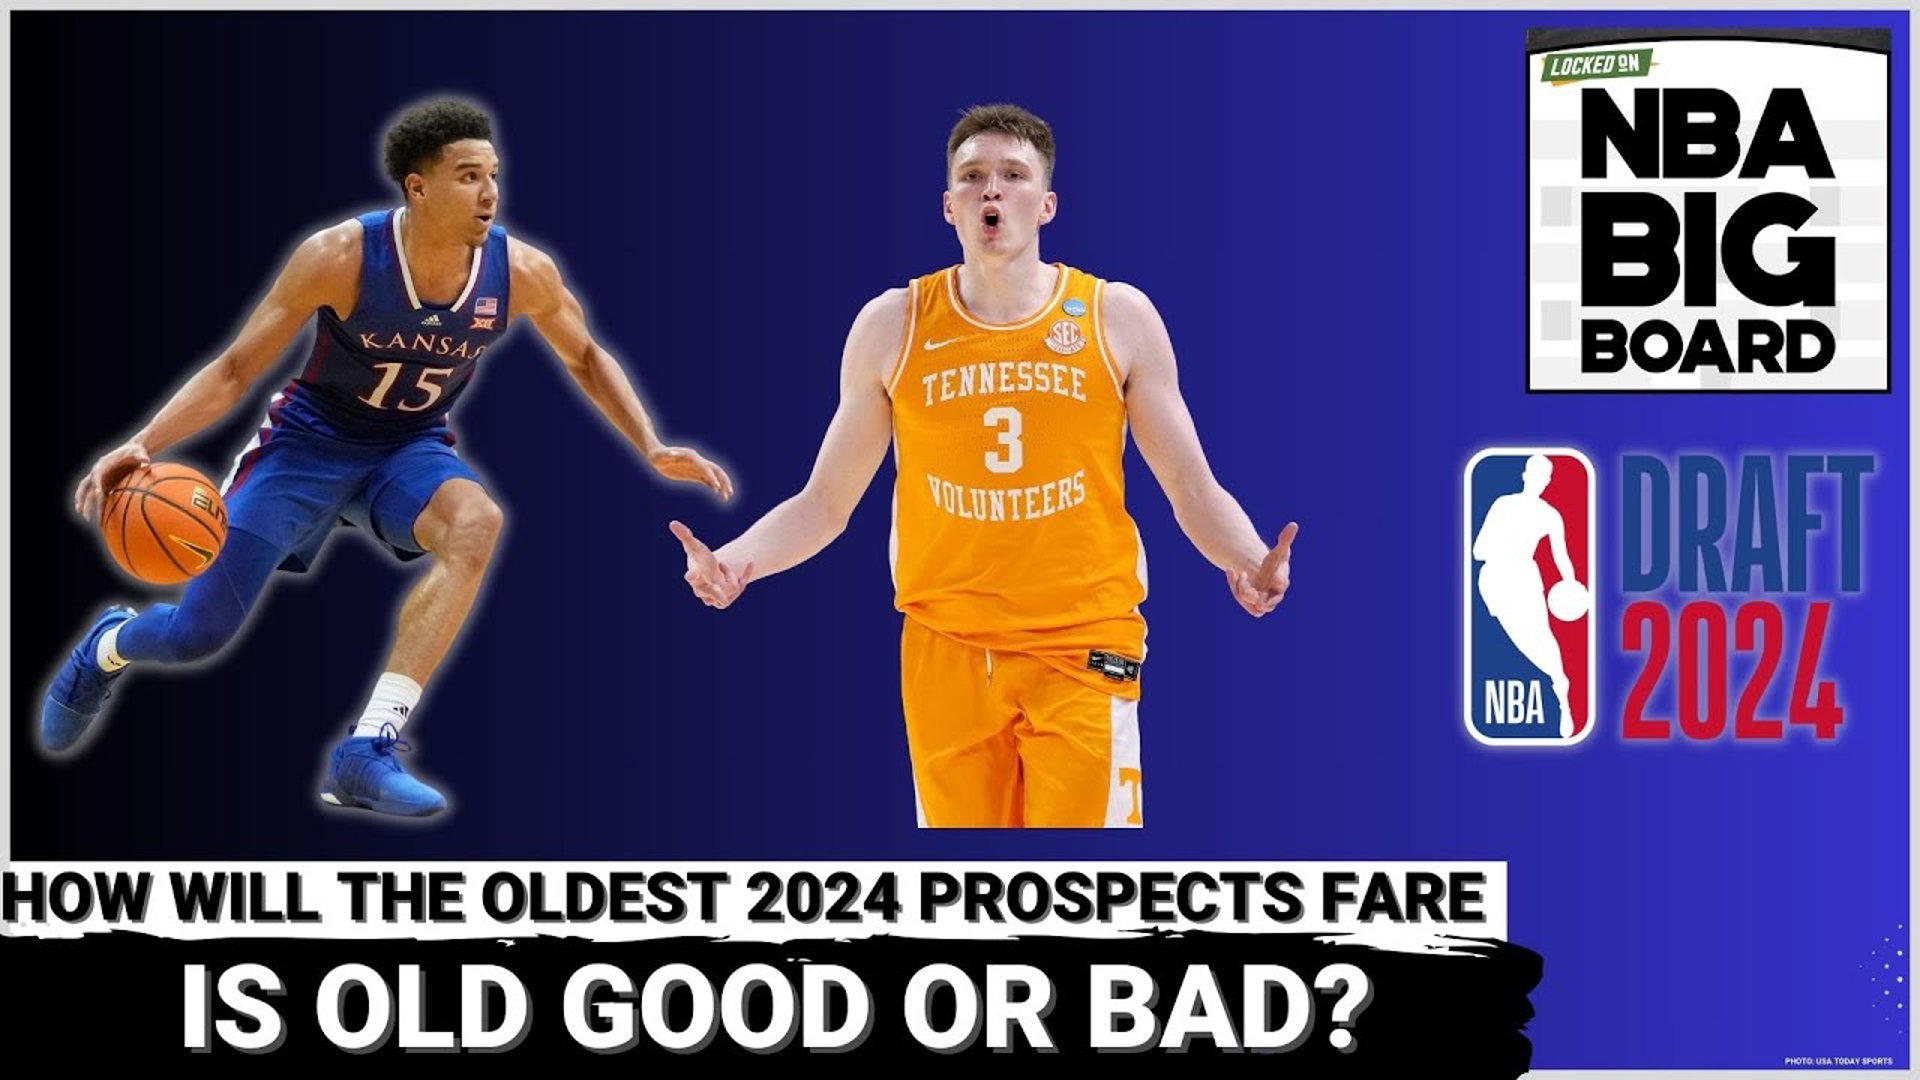 Leif Thulin and James Barlowe debate whether old prospects in the 2024 NBA Draft will have success.